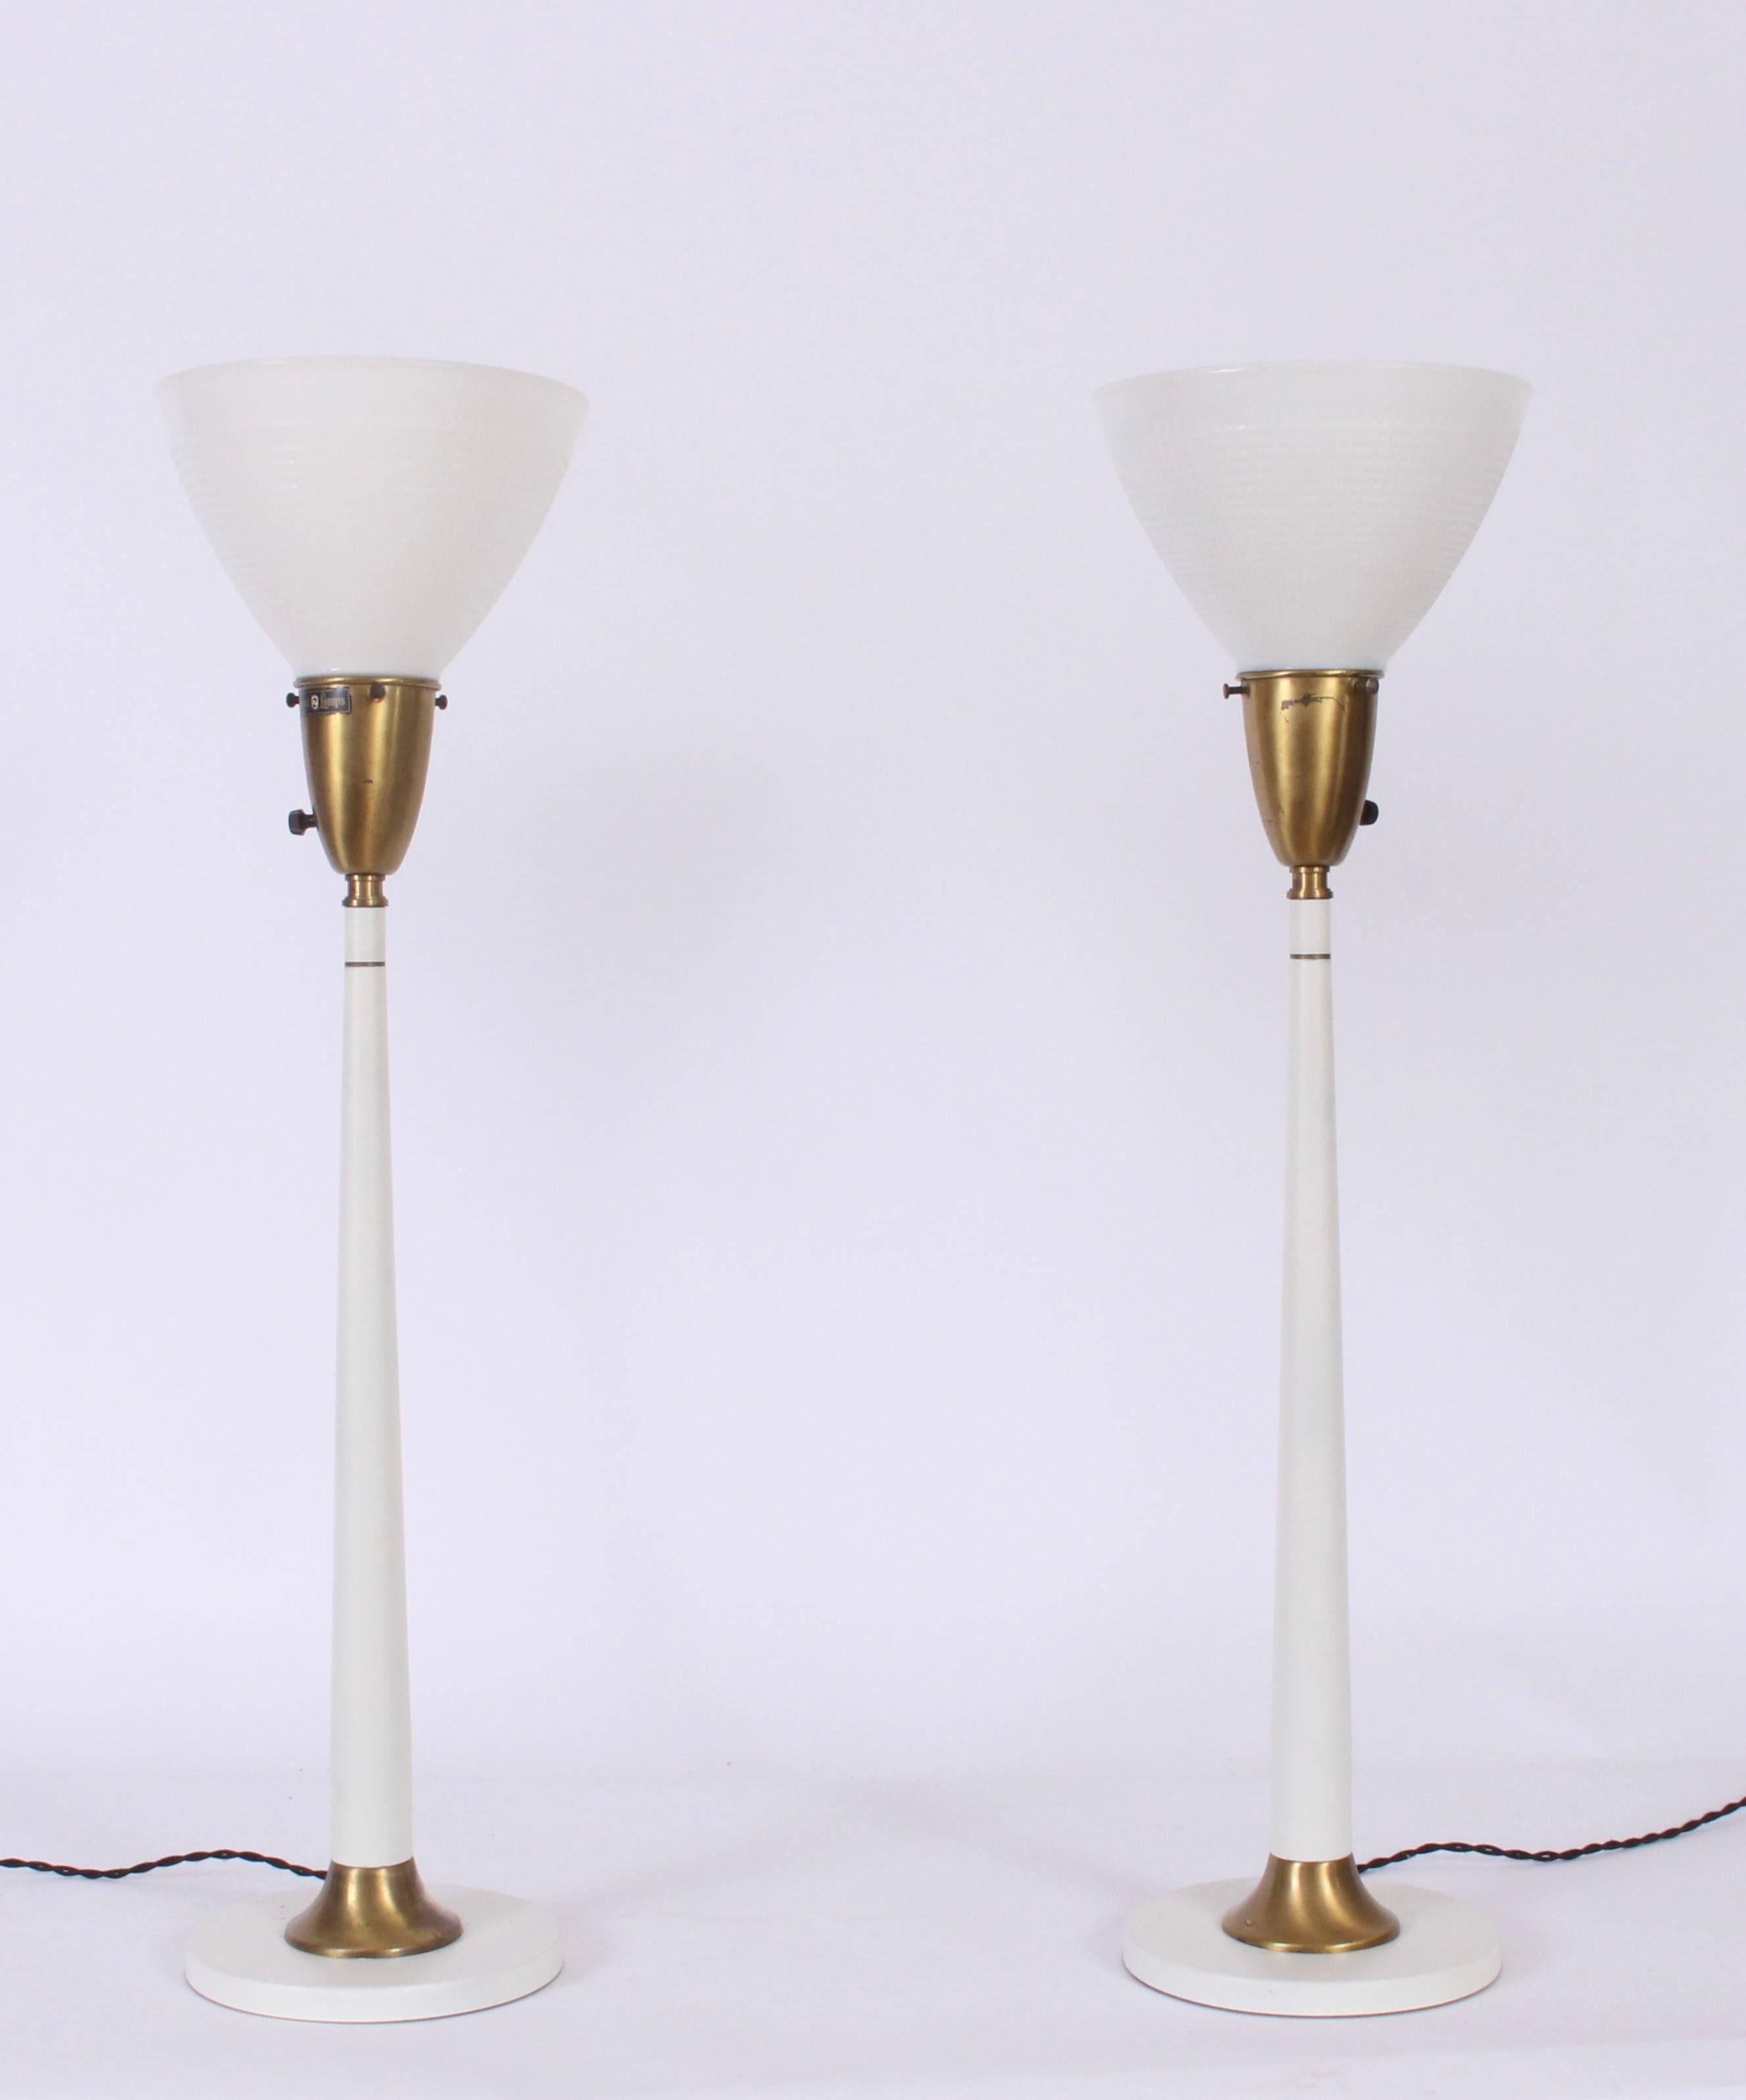 Pair of Rembrandt Lamp Company off white enamel and brass lamps with white milk glass shades. Featuring slim white candlesticks, and White glass liner shades on Round base. Patinated brass details. Small footprint. 24 H to top of socket. Shades